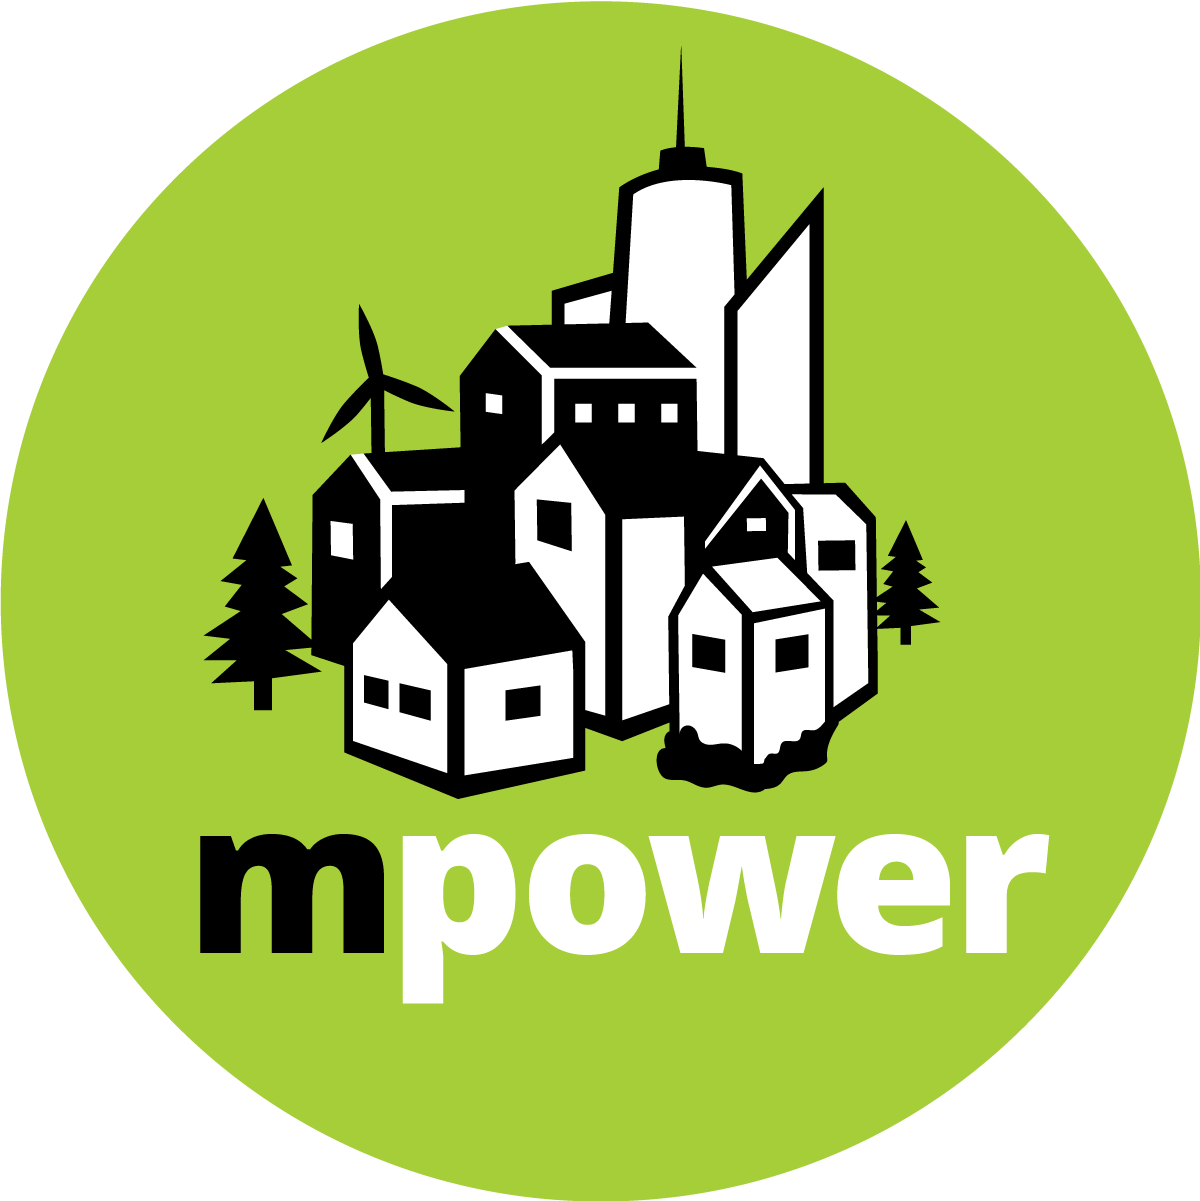 mPOWER ignites municipal action and enables Europe-wide city to city learning for fair, clean and democratic energy #energytransition #municipalism #p2plearning